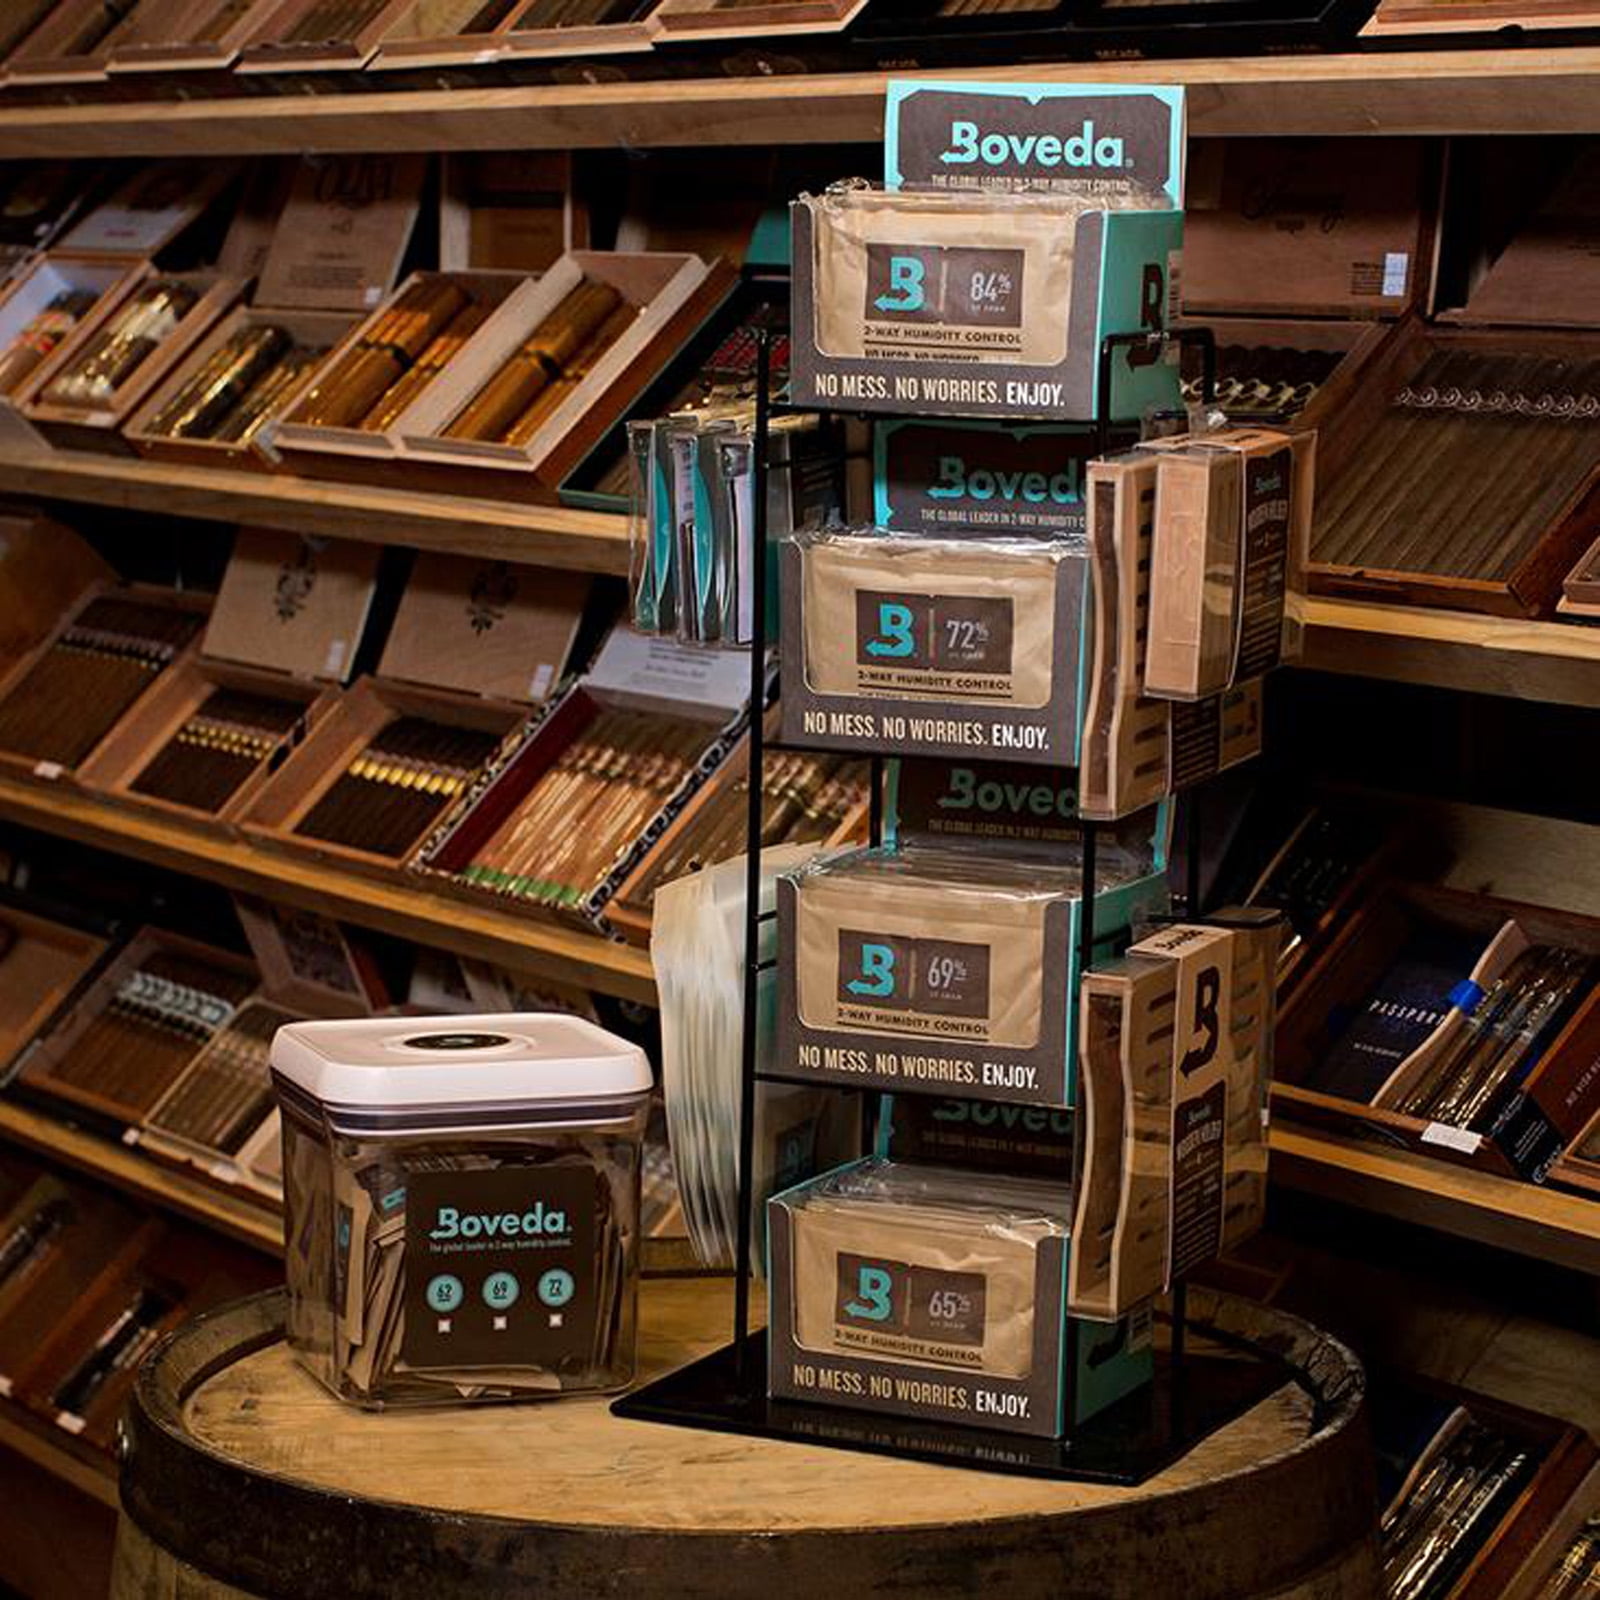 Boveda 62% Humidity Control Pack- 10 Piece Display